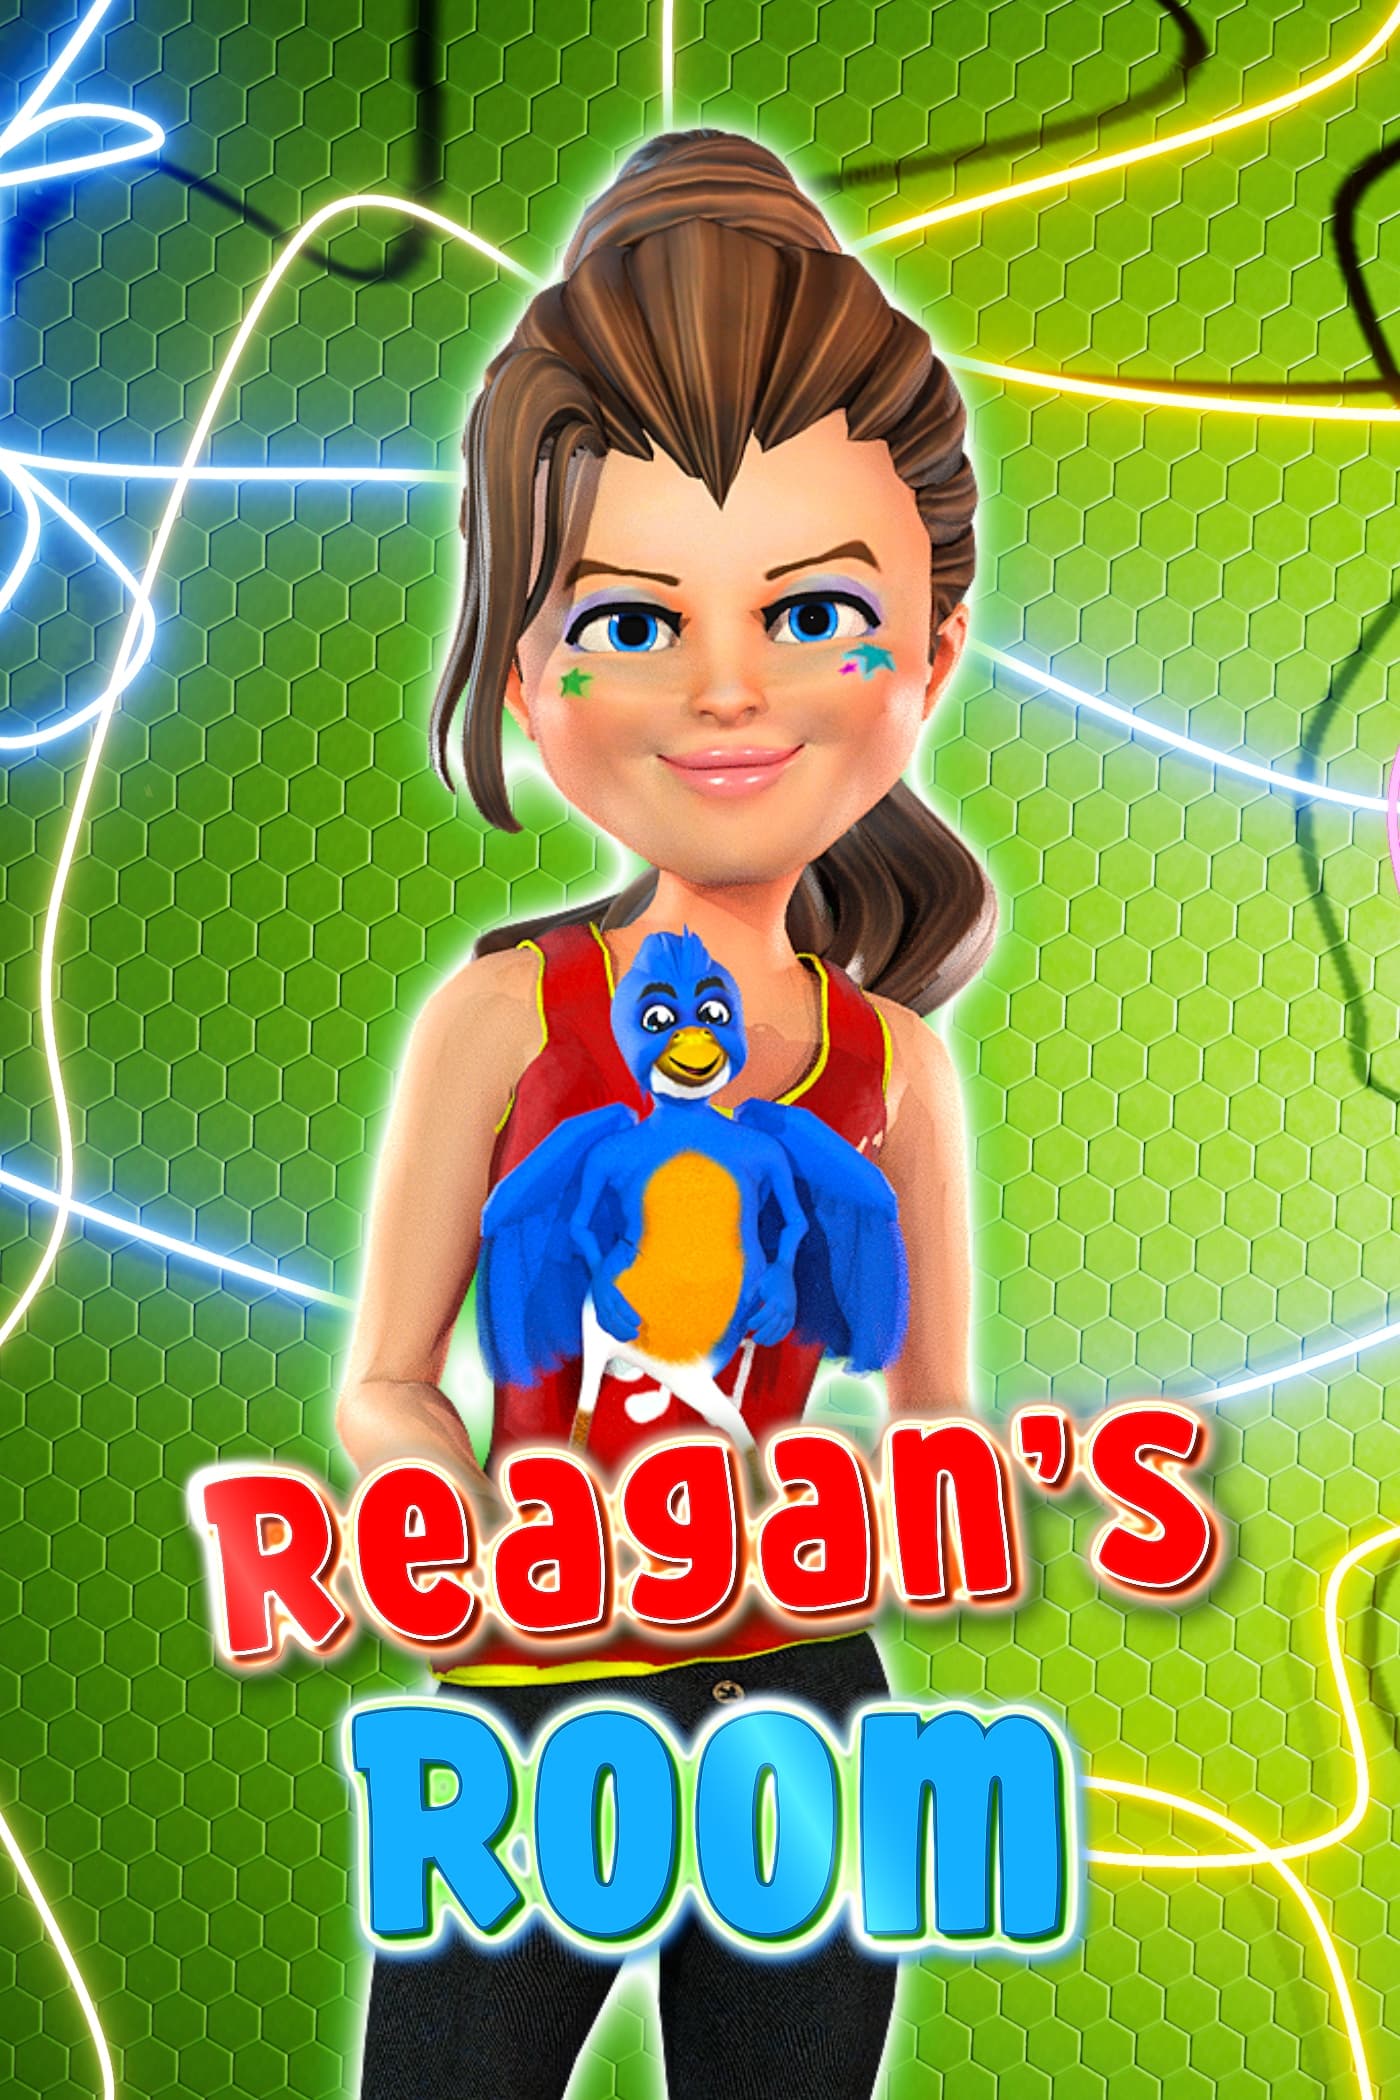 Reagan's Room on FREECABLE TV